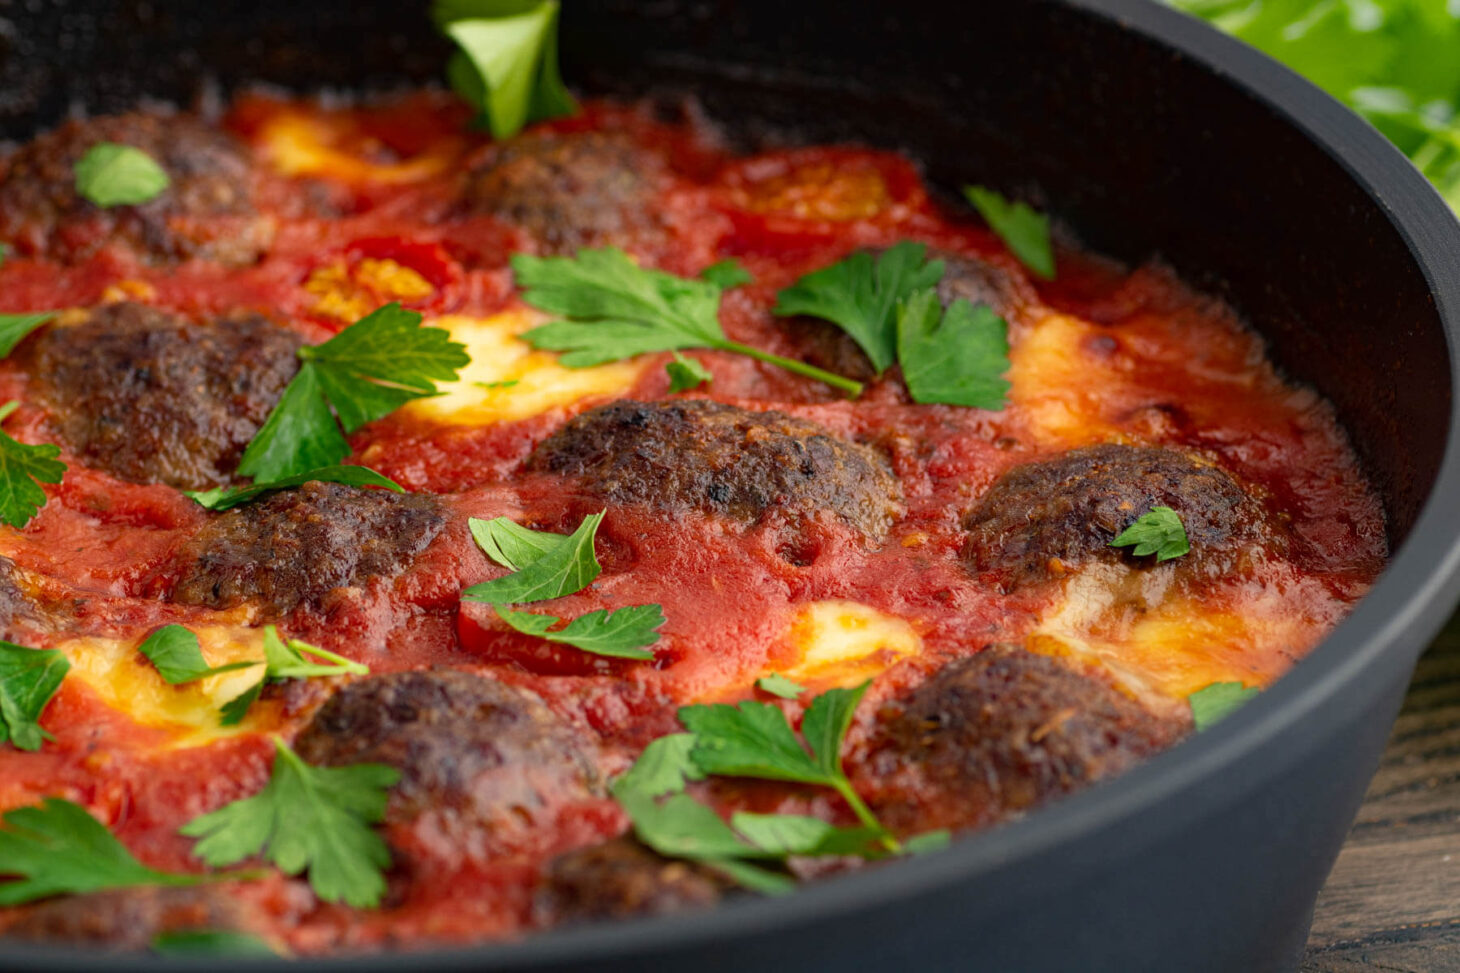 A pan of Oven Baked Meatballs in a rich tomato sauce with melted cheese garnished with Italian parsley.